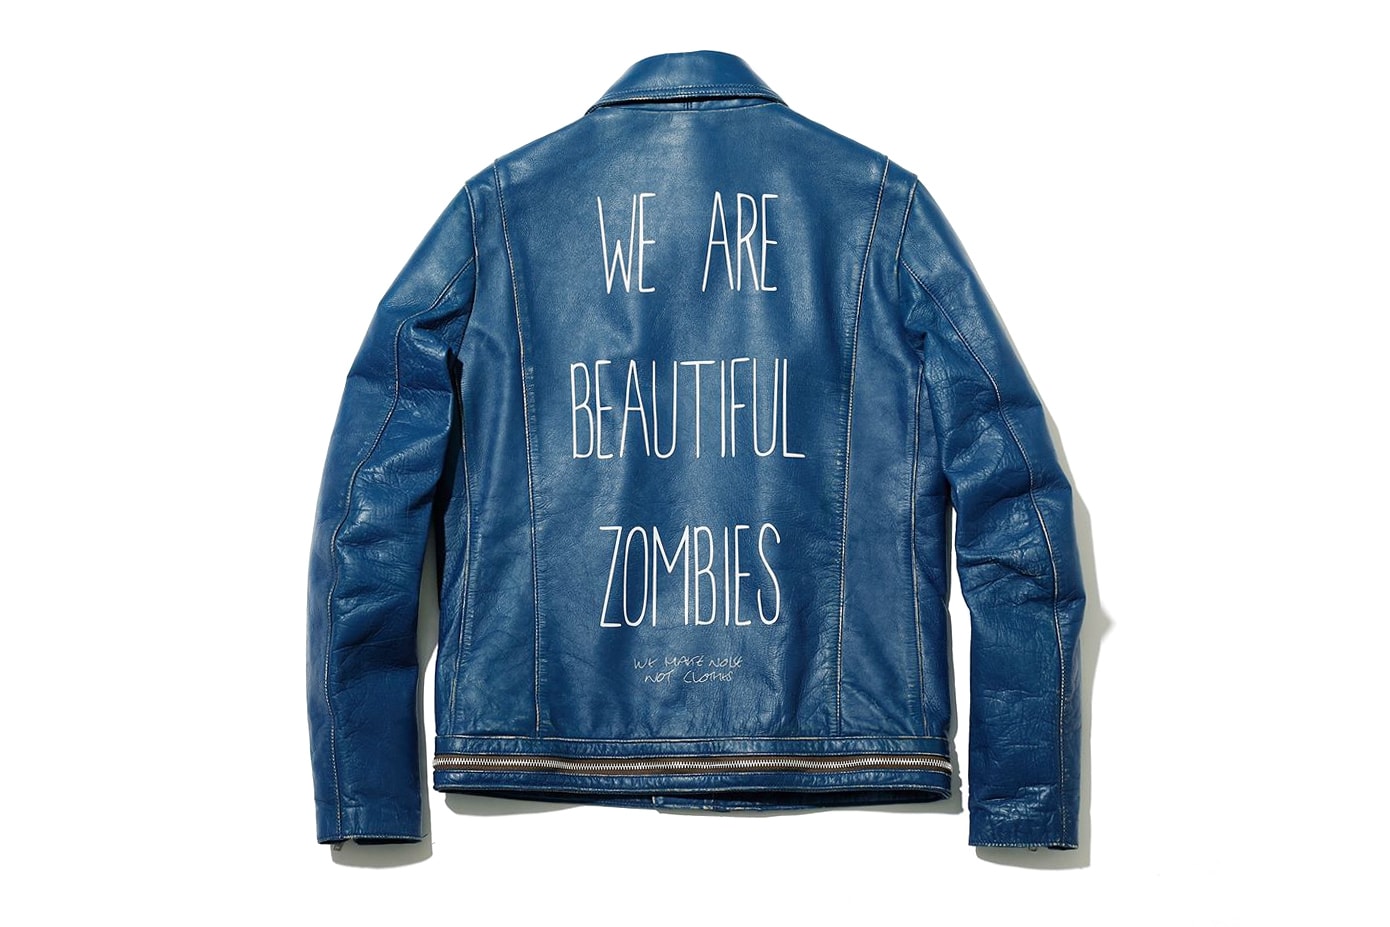 UNDERCOVER Dover Street Market Ginza 5th Anniversary We Are Beautiful Zombies Jacket Back